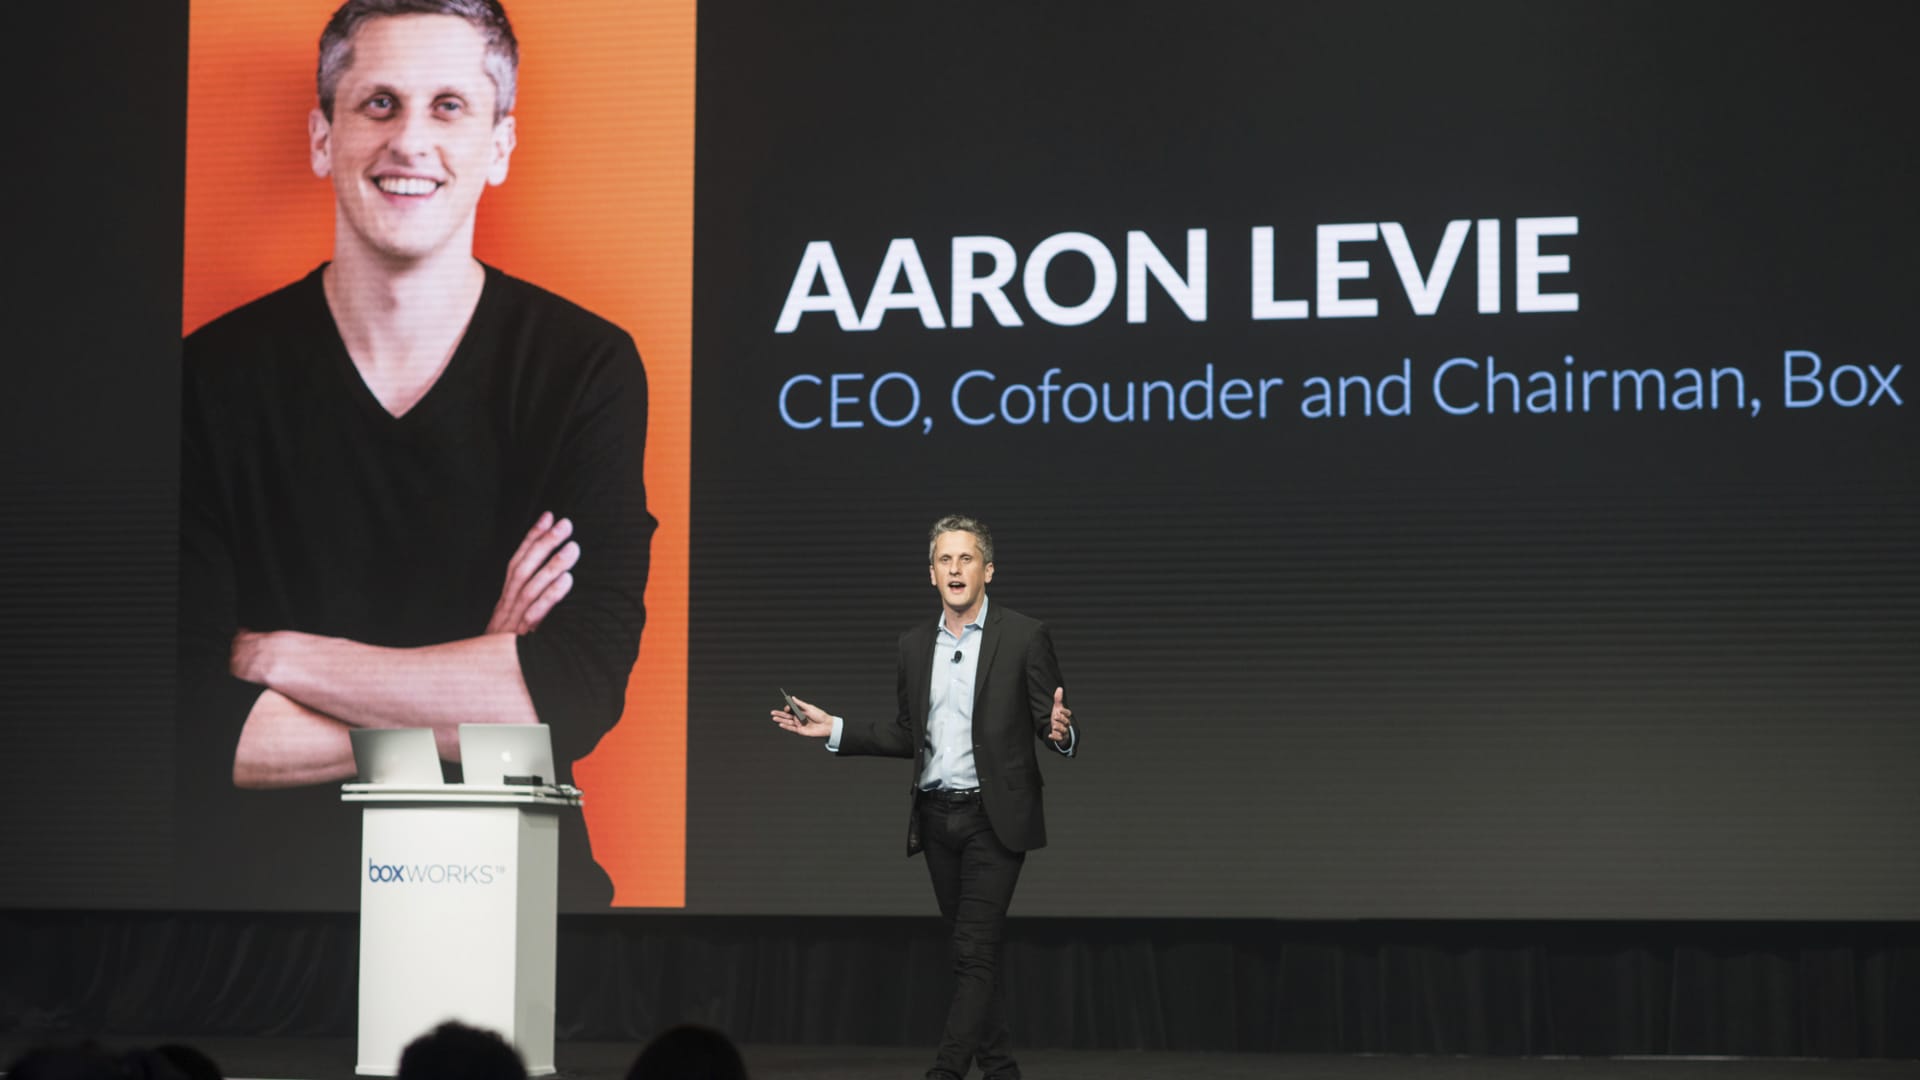 Box CEO Aaron Levie speaking at BoxWorks in 2018